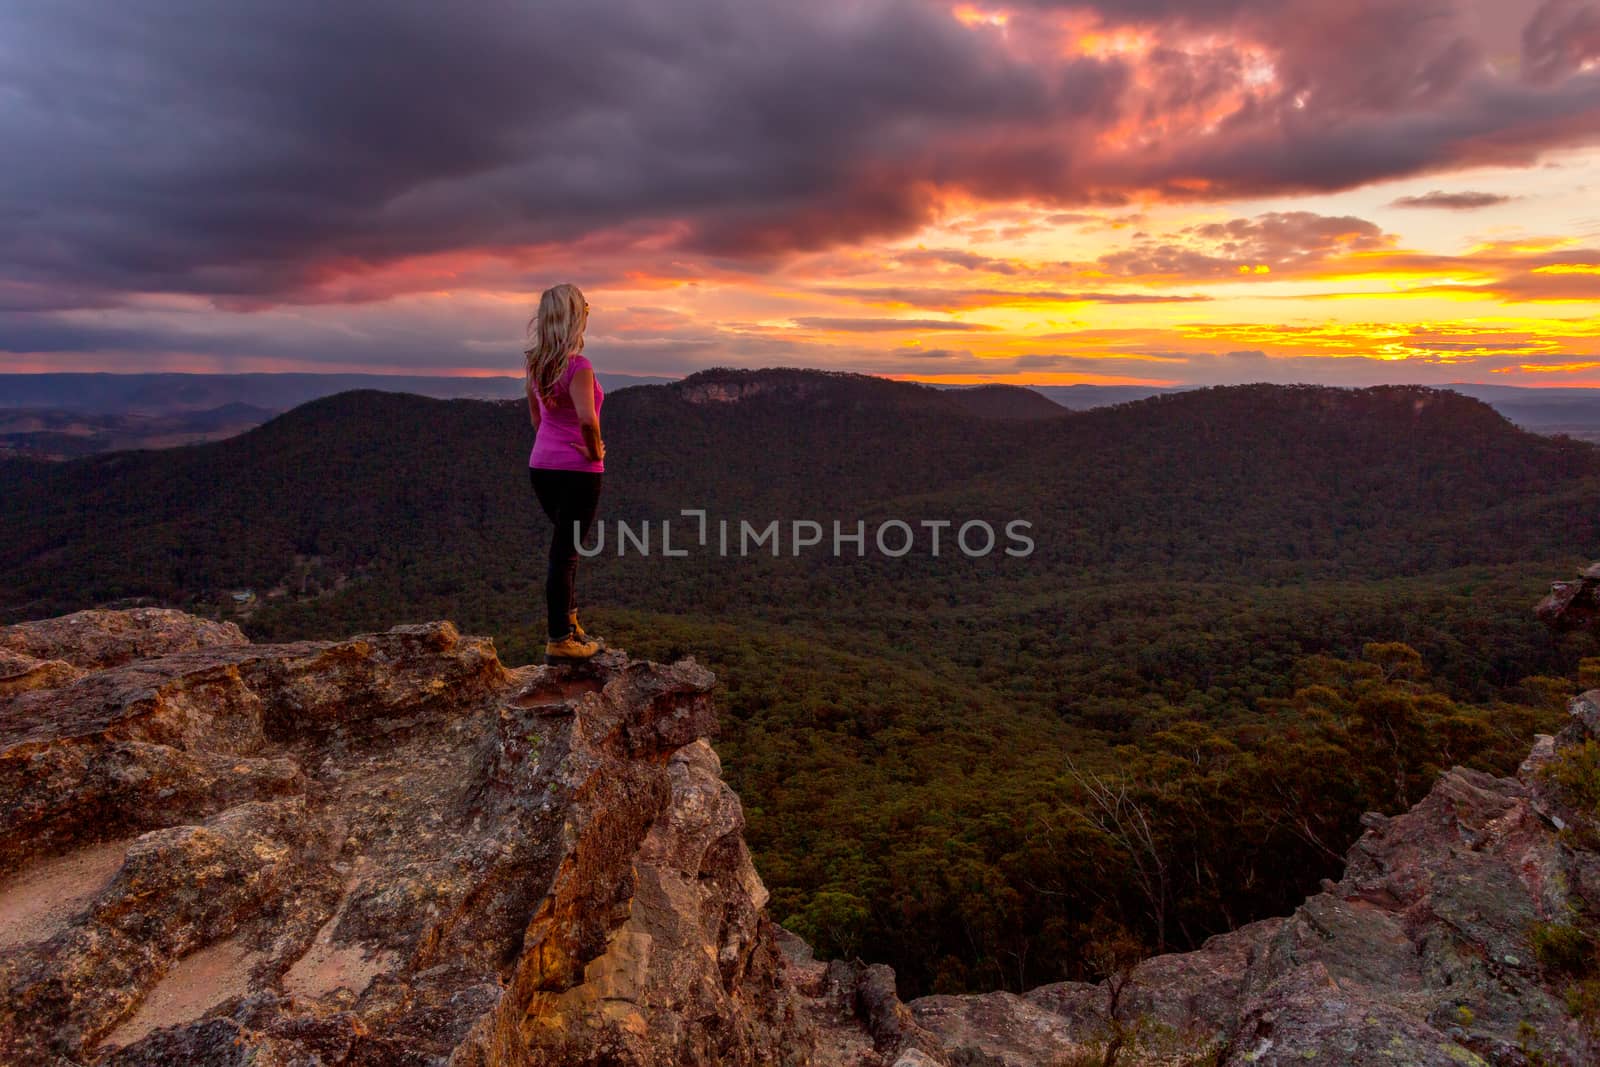 Storm clouds hover over Blue Mountains and valleys as the sun sets.  A woman stands on the rocky precipice taking in the magnificent views